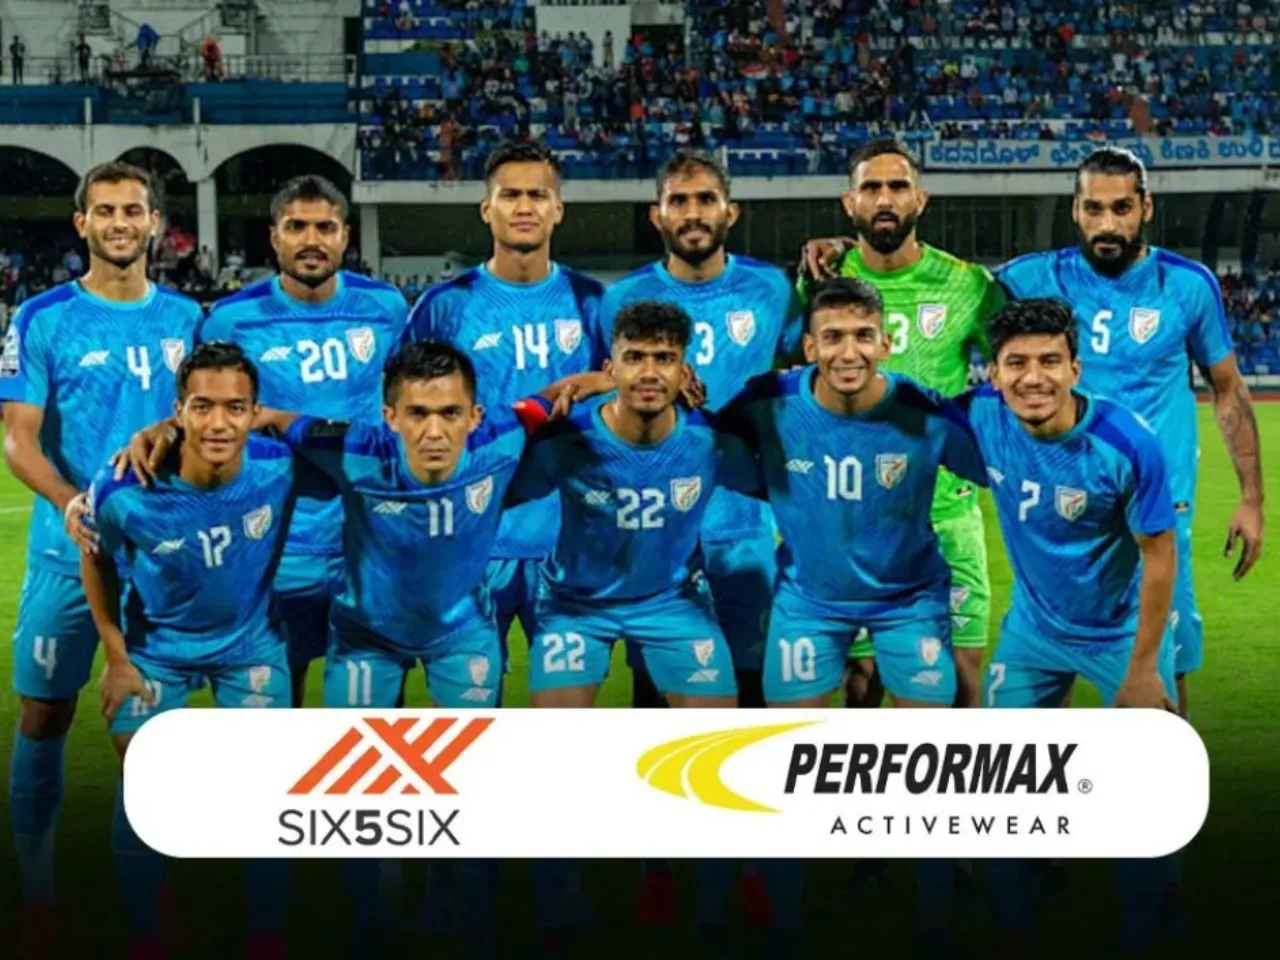 Performax partners with AIFF